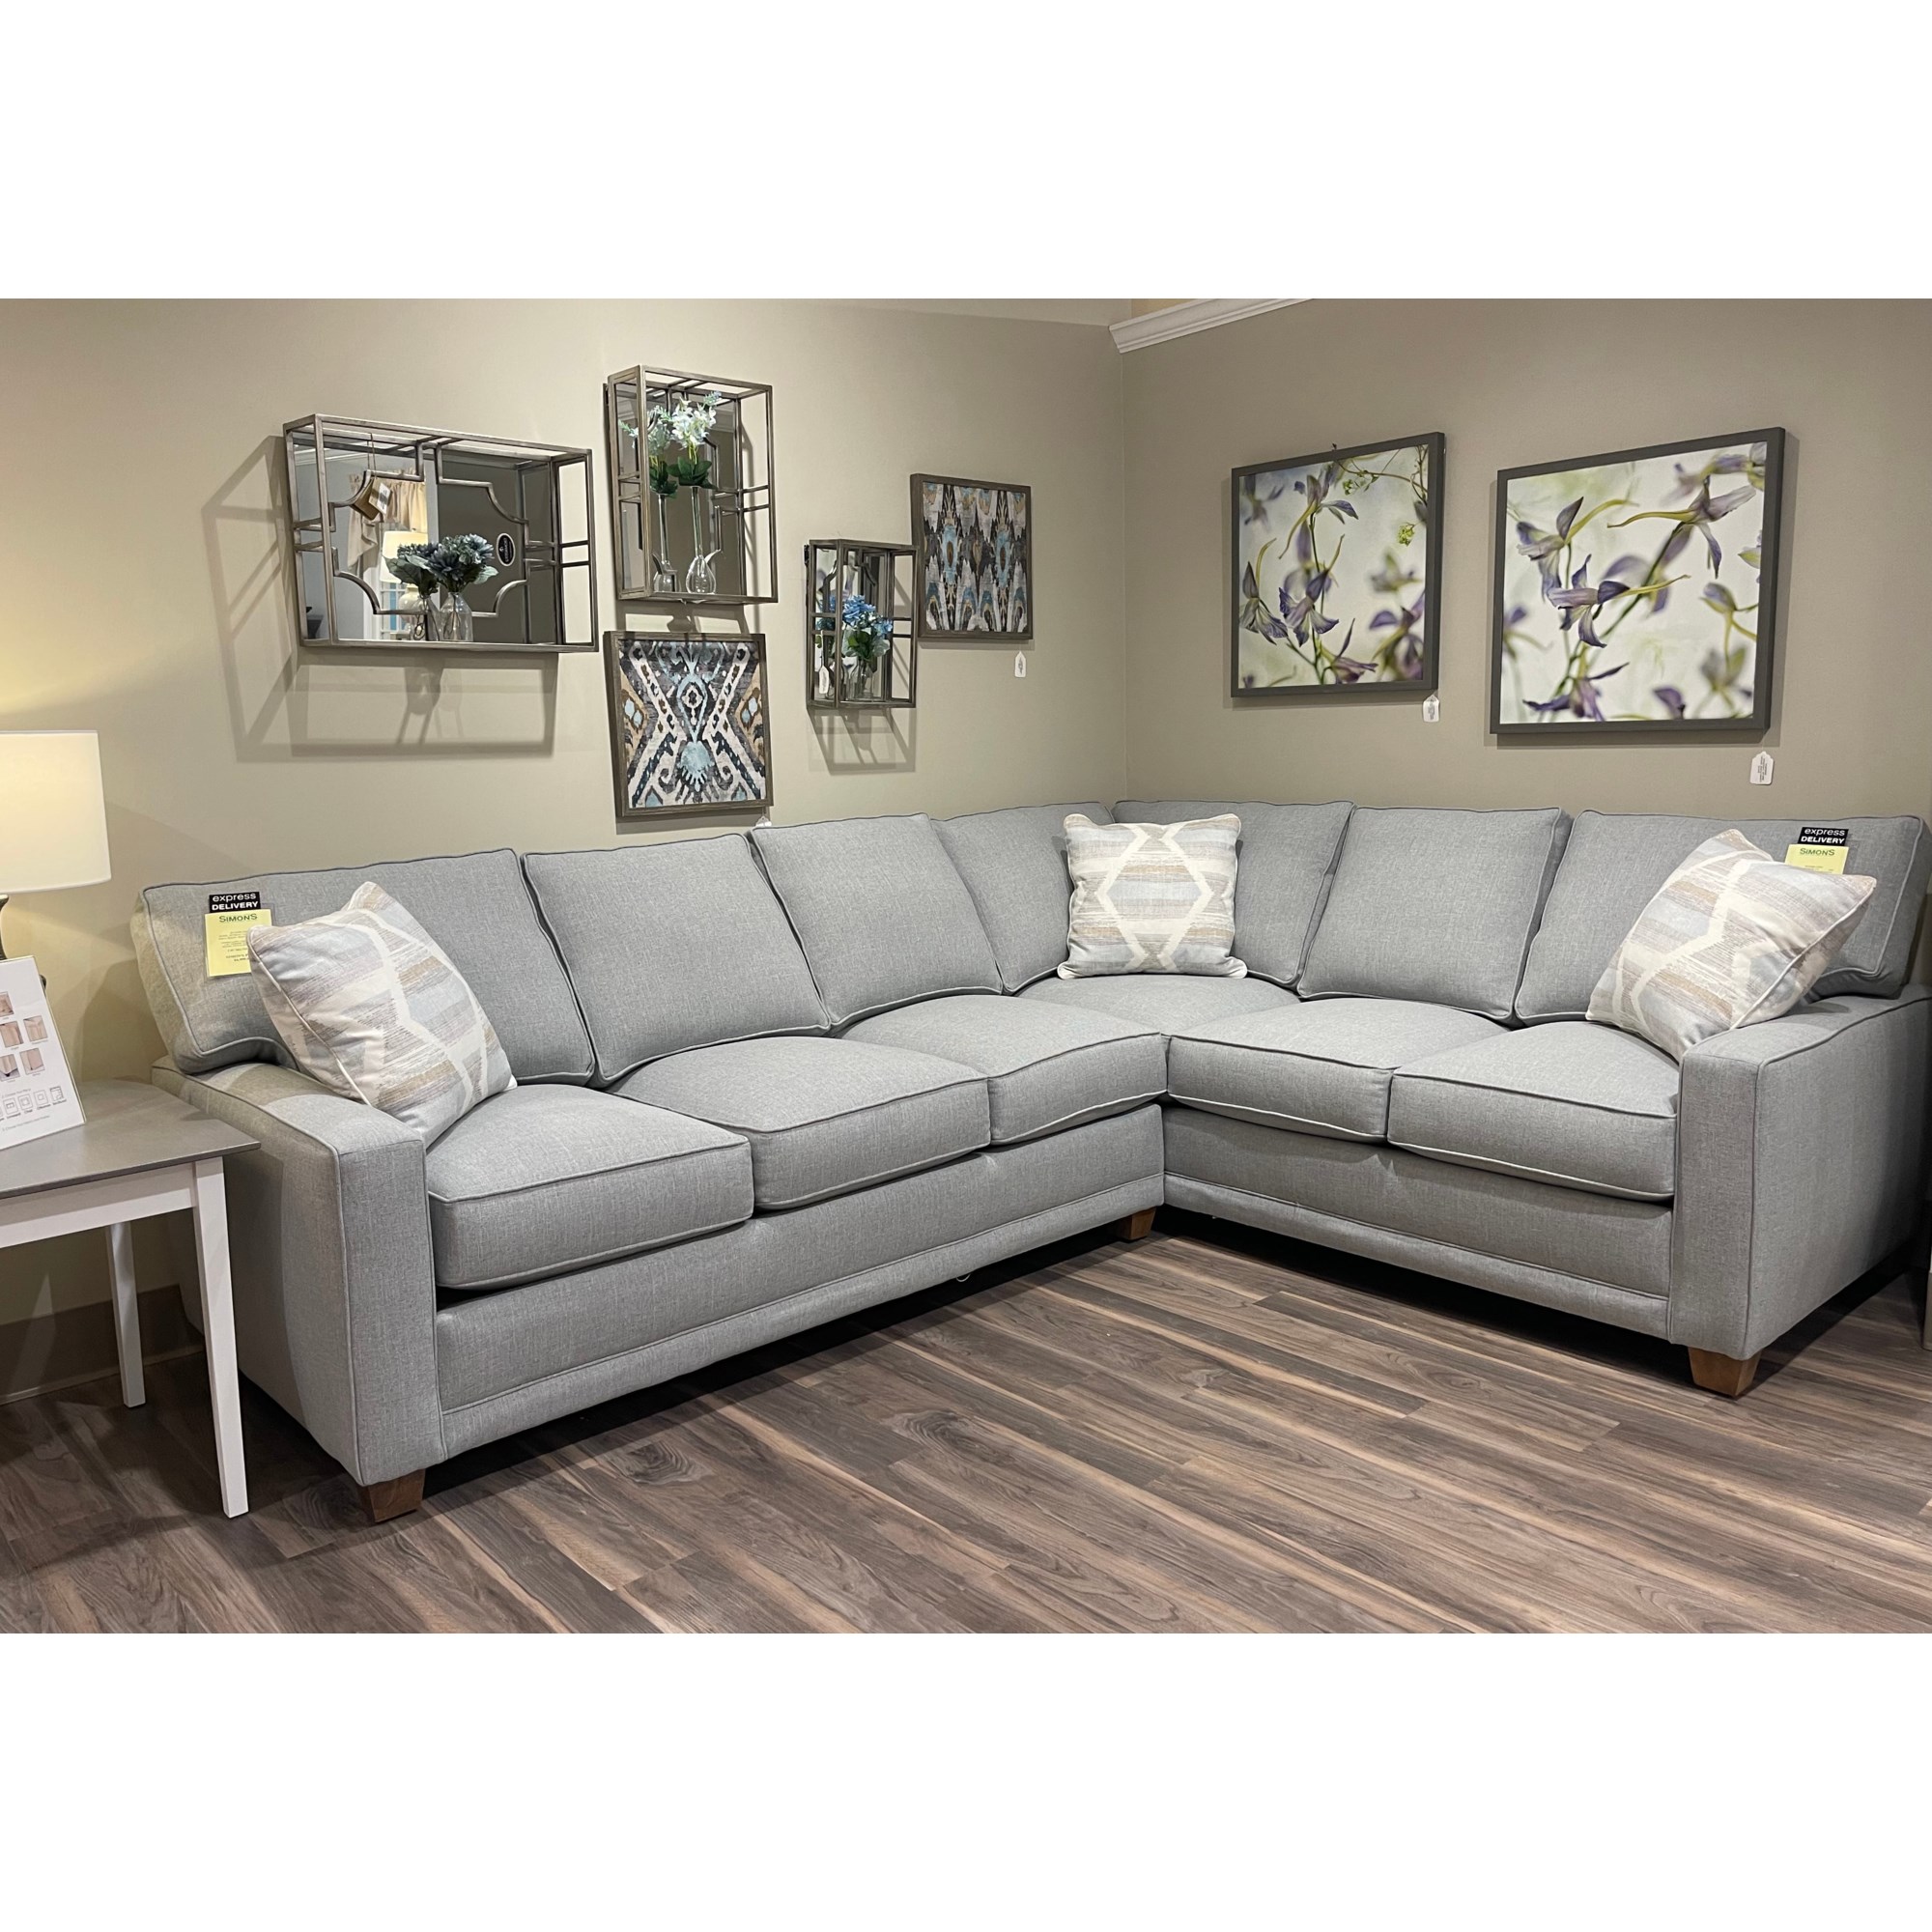 How to Style a Sectional 